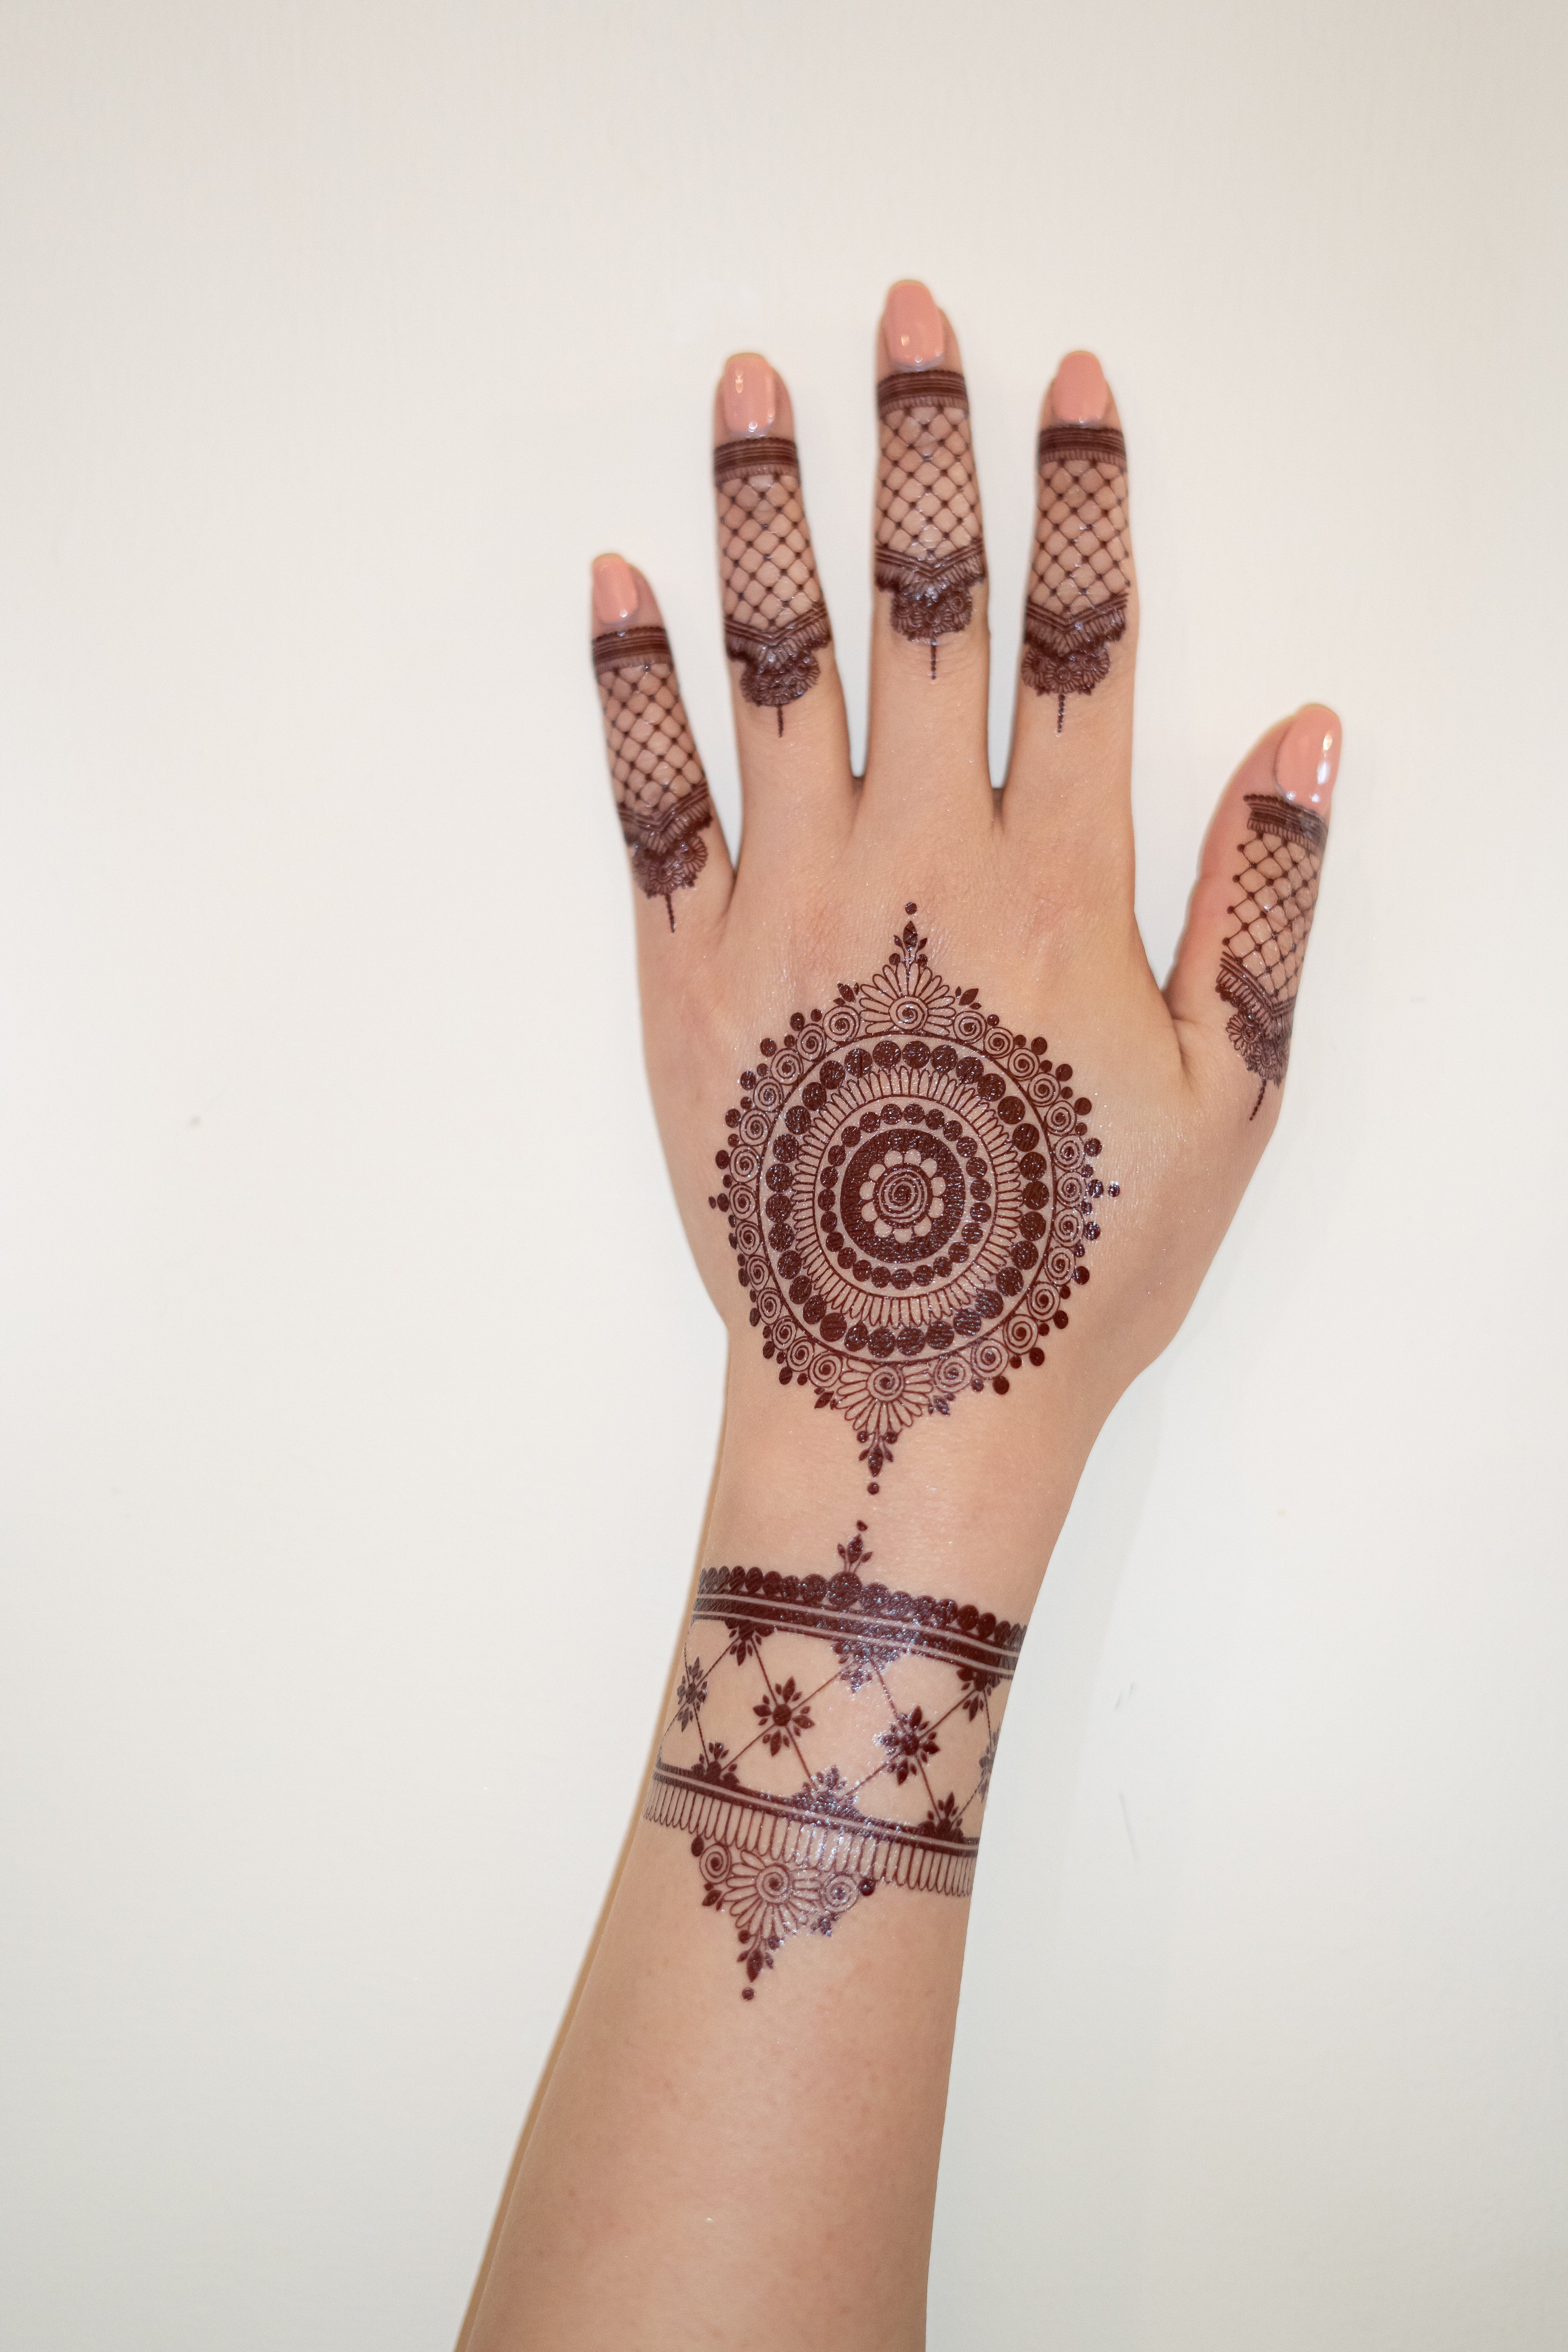 Teen Henna Tattoos · Charlotte and William Bloomberg Medford Public Library